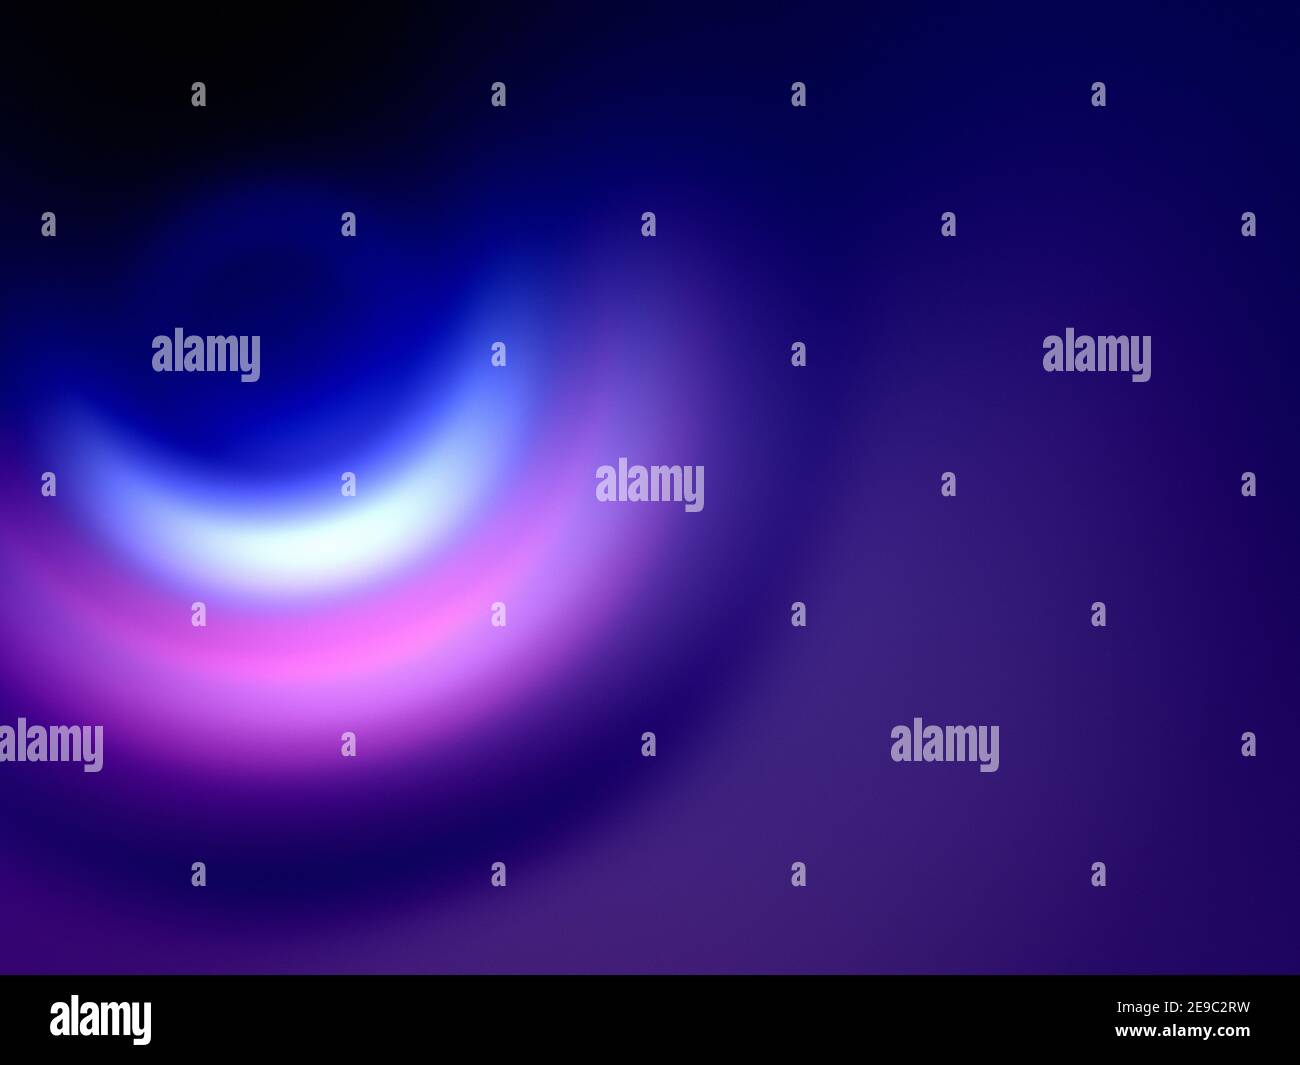 Abstract photo light blur photography background. The image is a long exposure light blurred photo which can be used as a background or to symbolize l Stock Photo